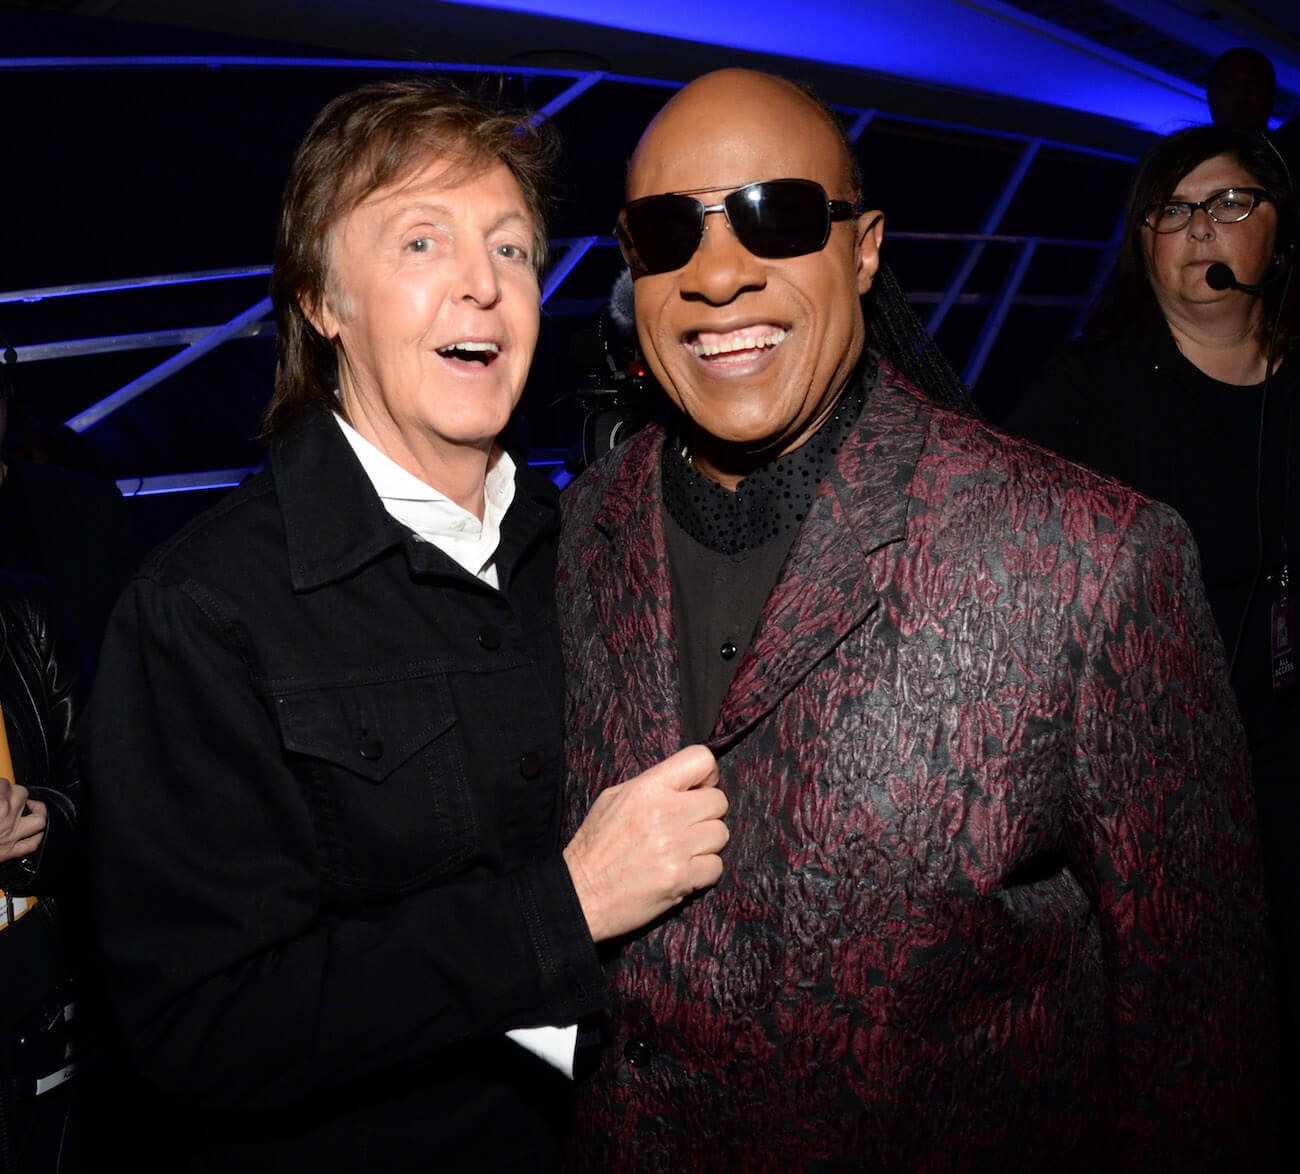 Paul McCartney and Stevie Wonder at the 2015 Rock & Roll Hall of Fame inductions.